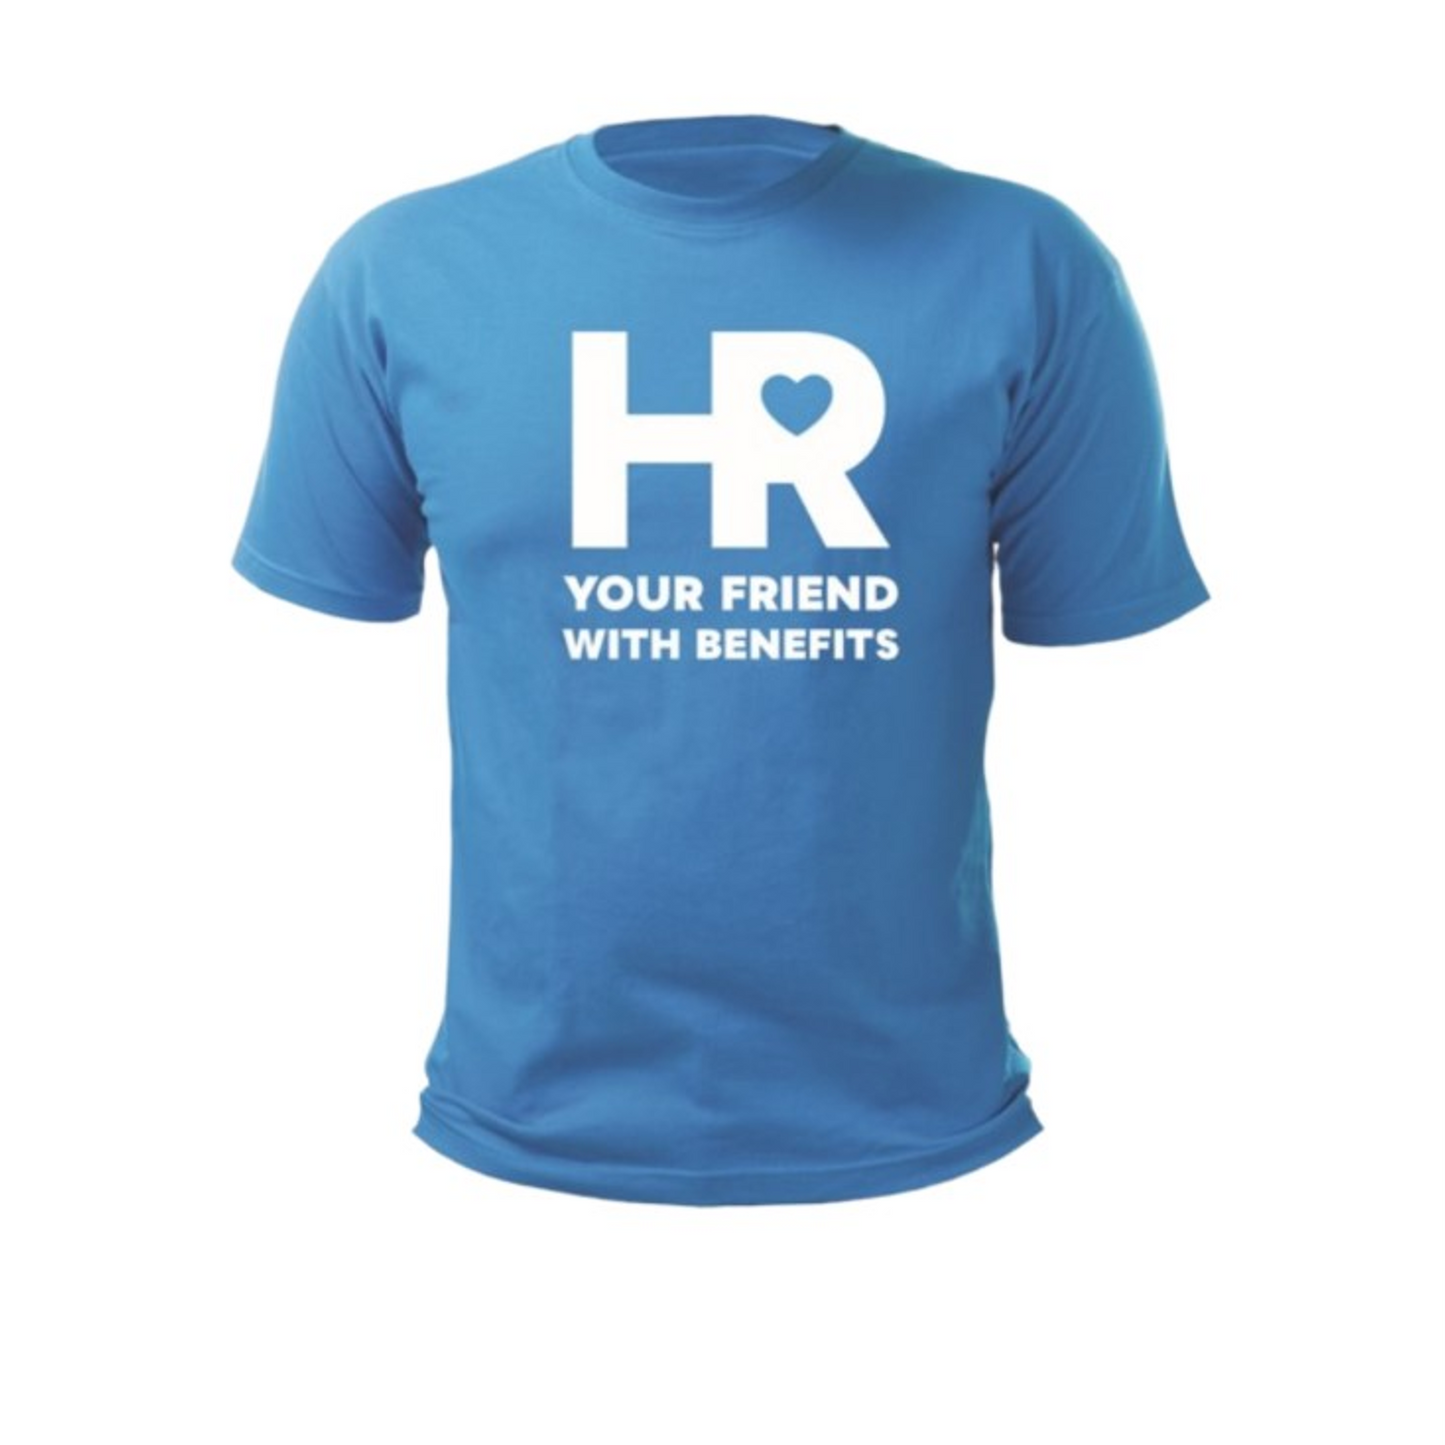 HR Your Friend With Benefits | Heathered Royal Blue Short Sleeve T-Shirt